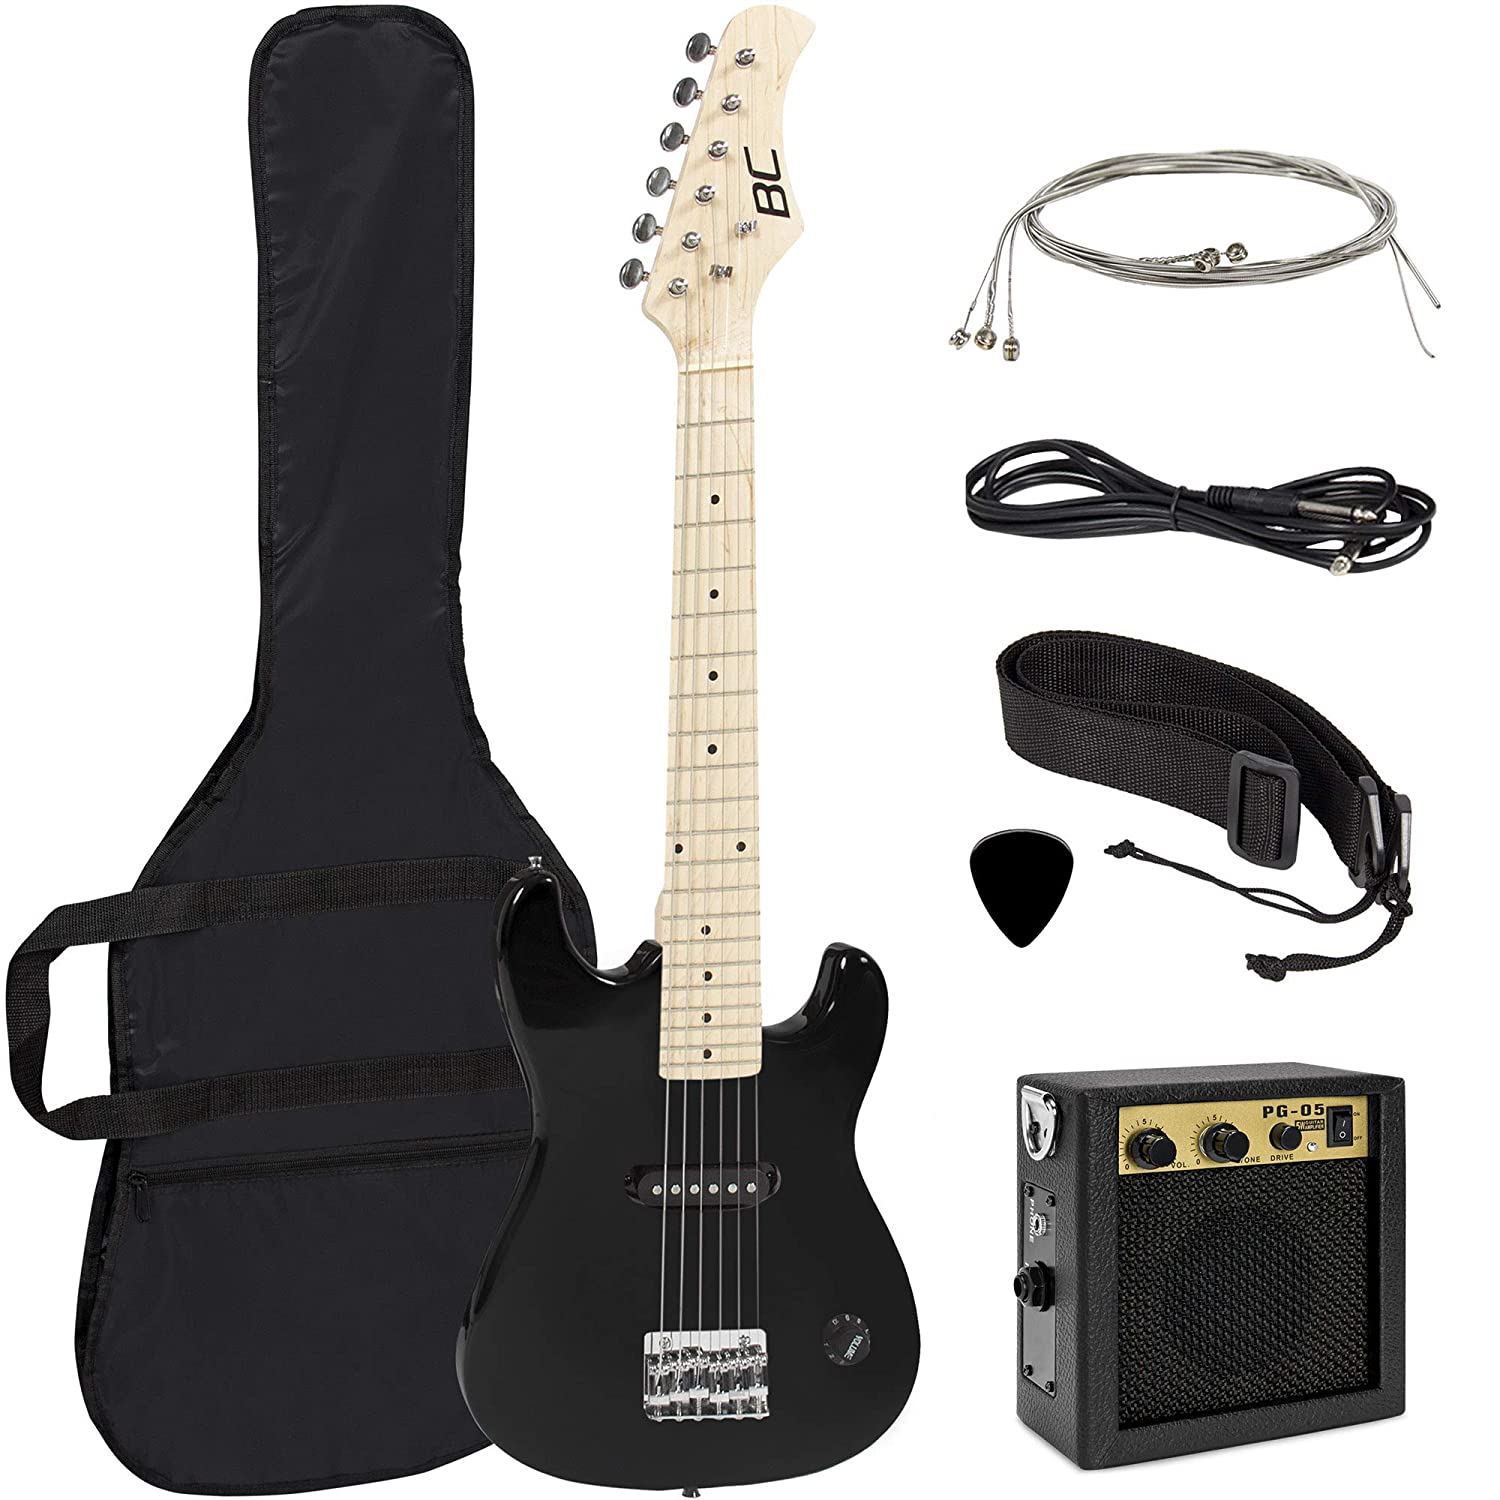 Best Choice Products 30in Kids 6-String Electric Guitar Musical Instrument Starter Kit w/ 5W Amplifier, Shoulder Straps, Nylon Carrying Bag, Strings, Picks - Black